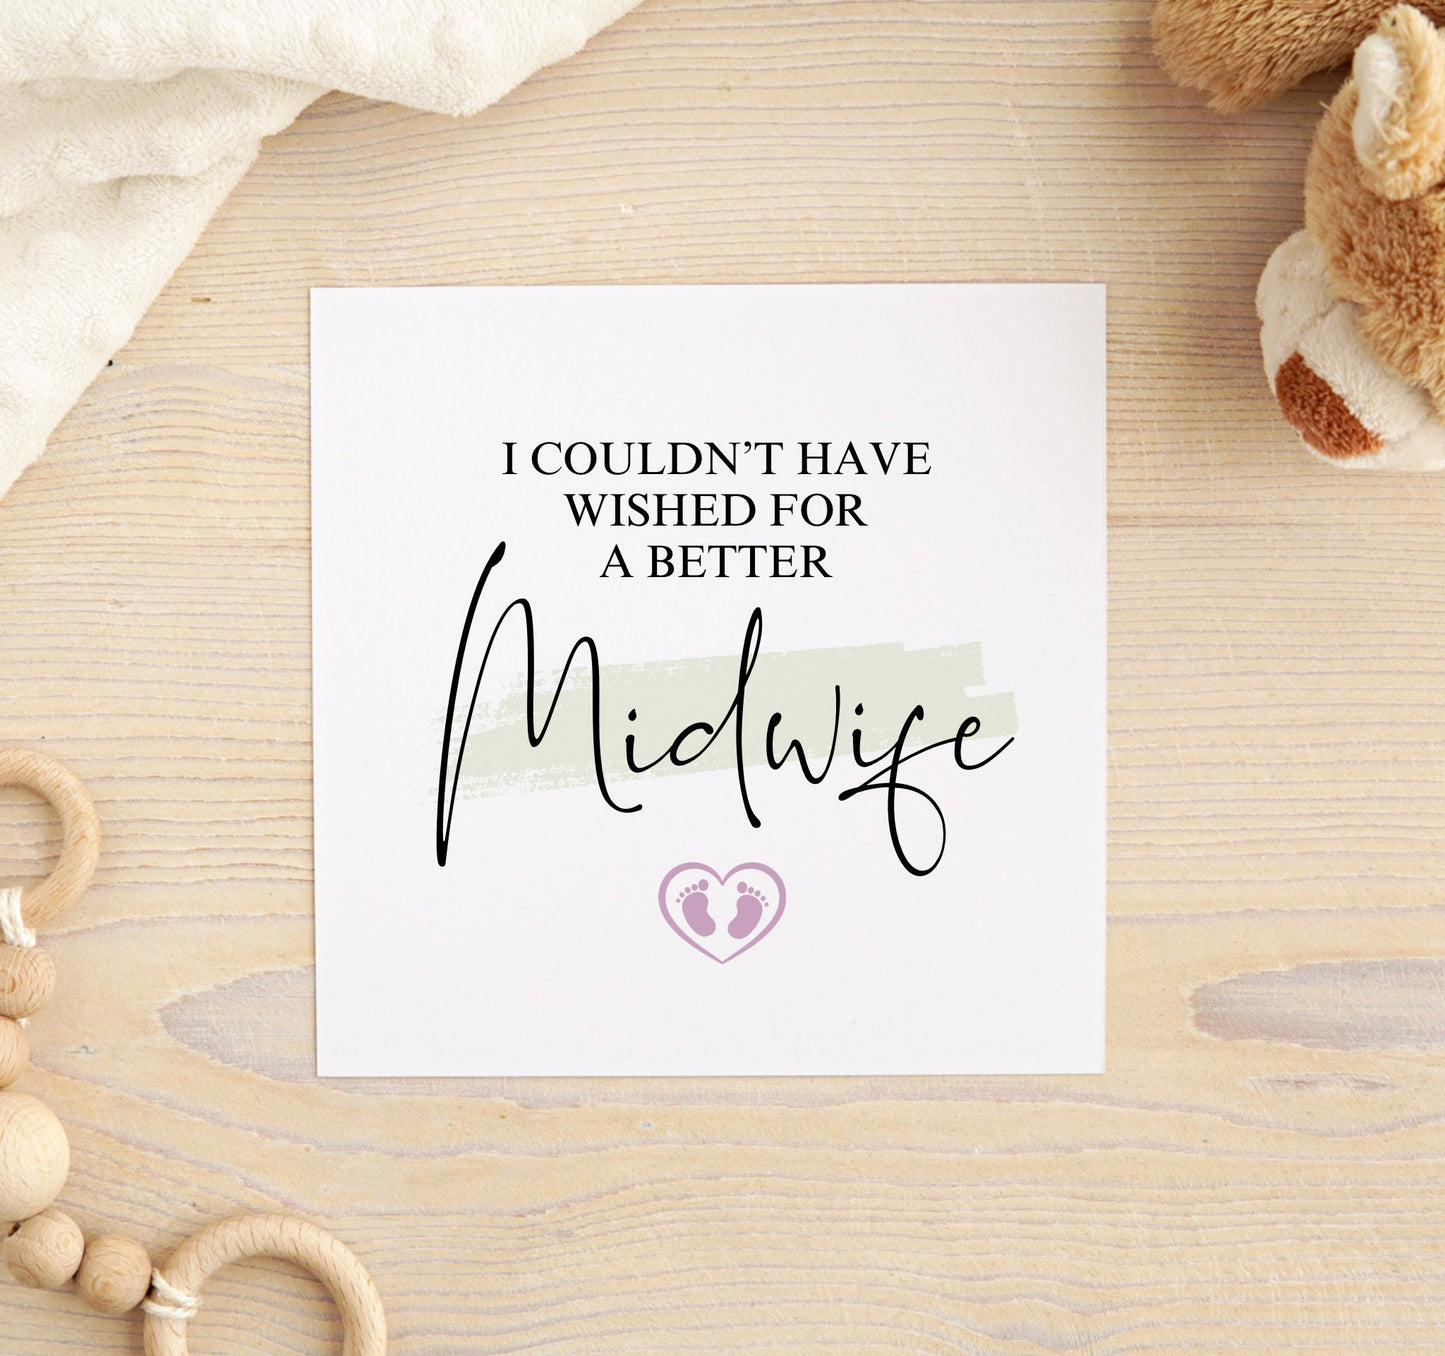 Thank You Midwife card, Couldn’t Have Asked for a Better Midwife, Thank You / Appreciation Card for Midwife